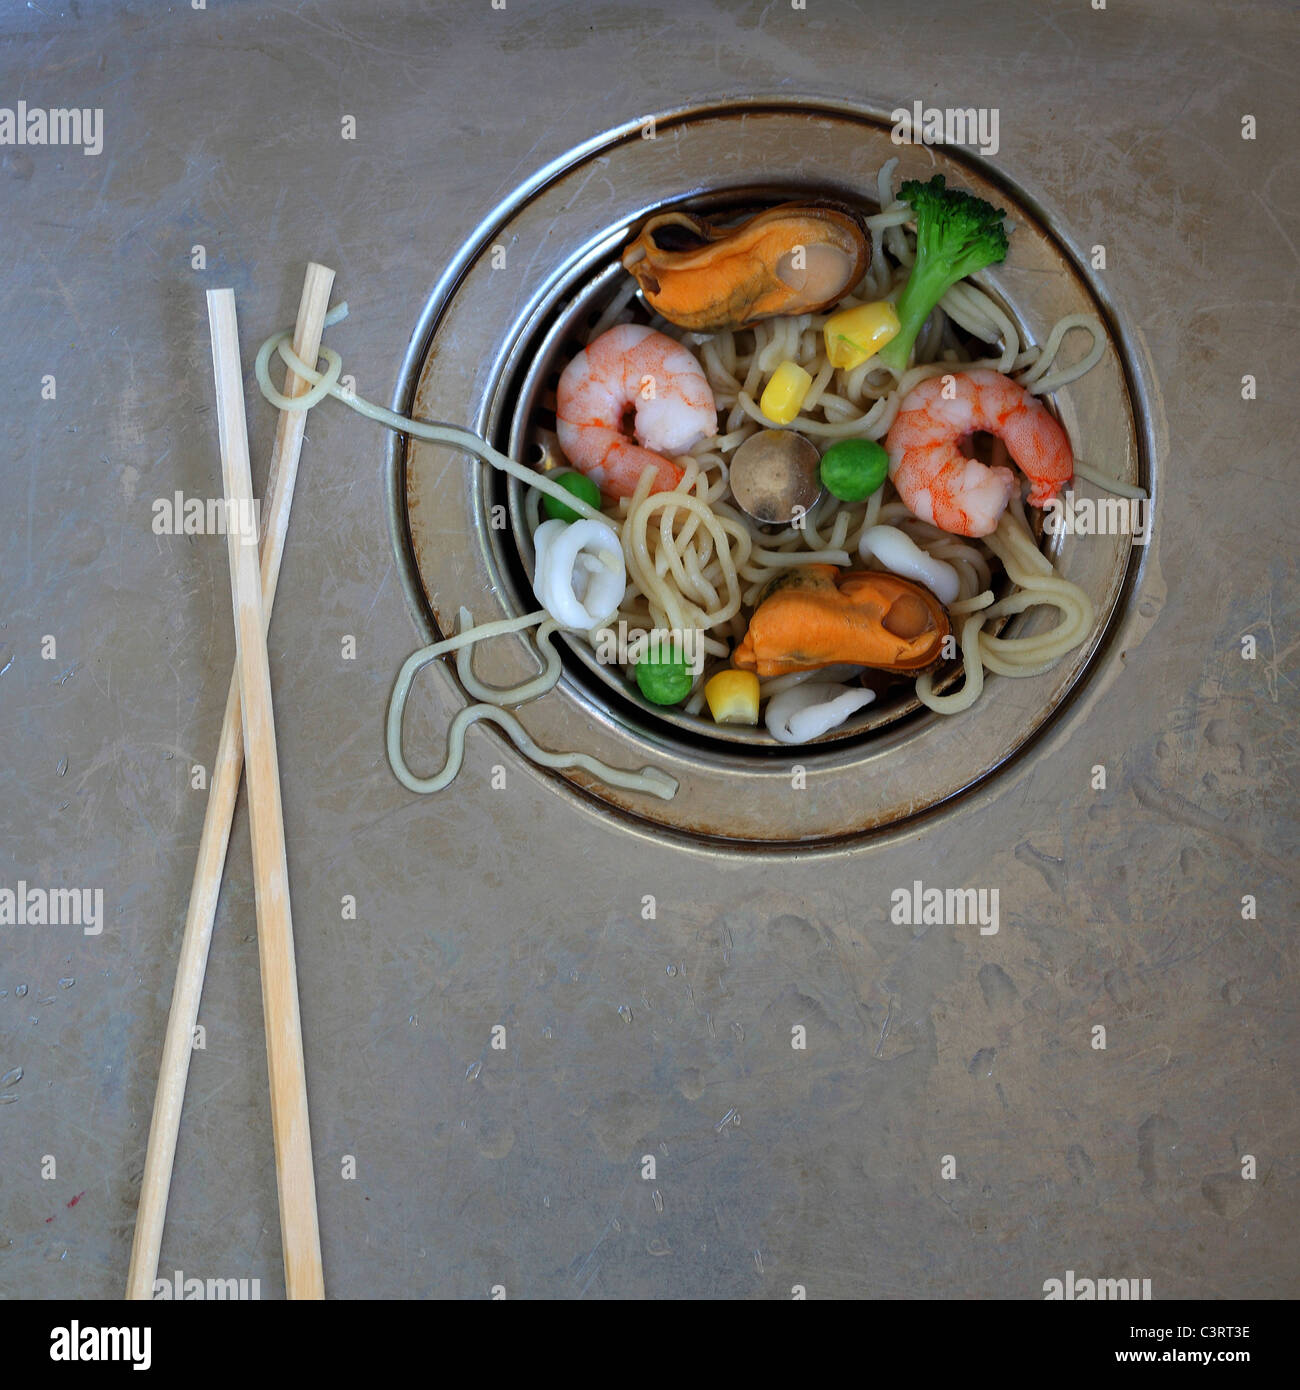 sink drain seafood leftovers Stock Photo